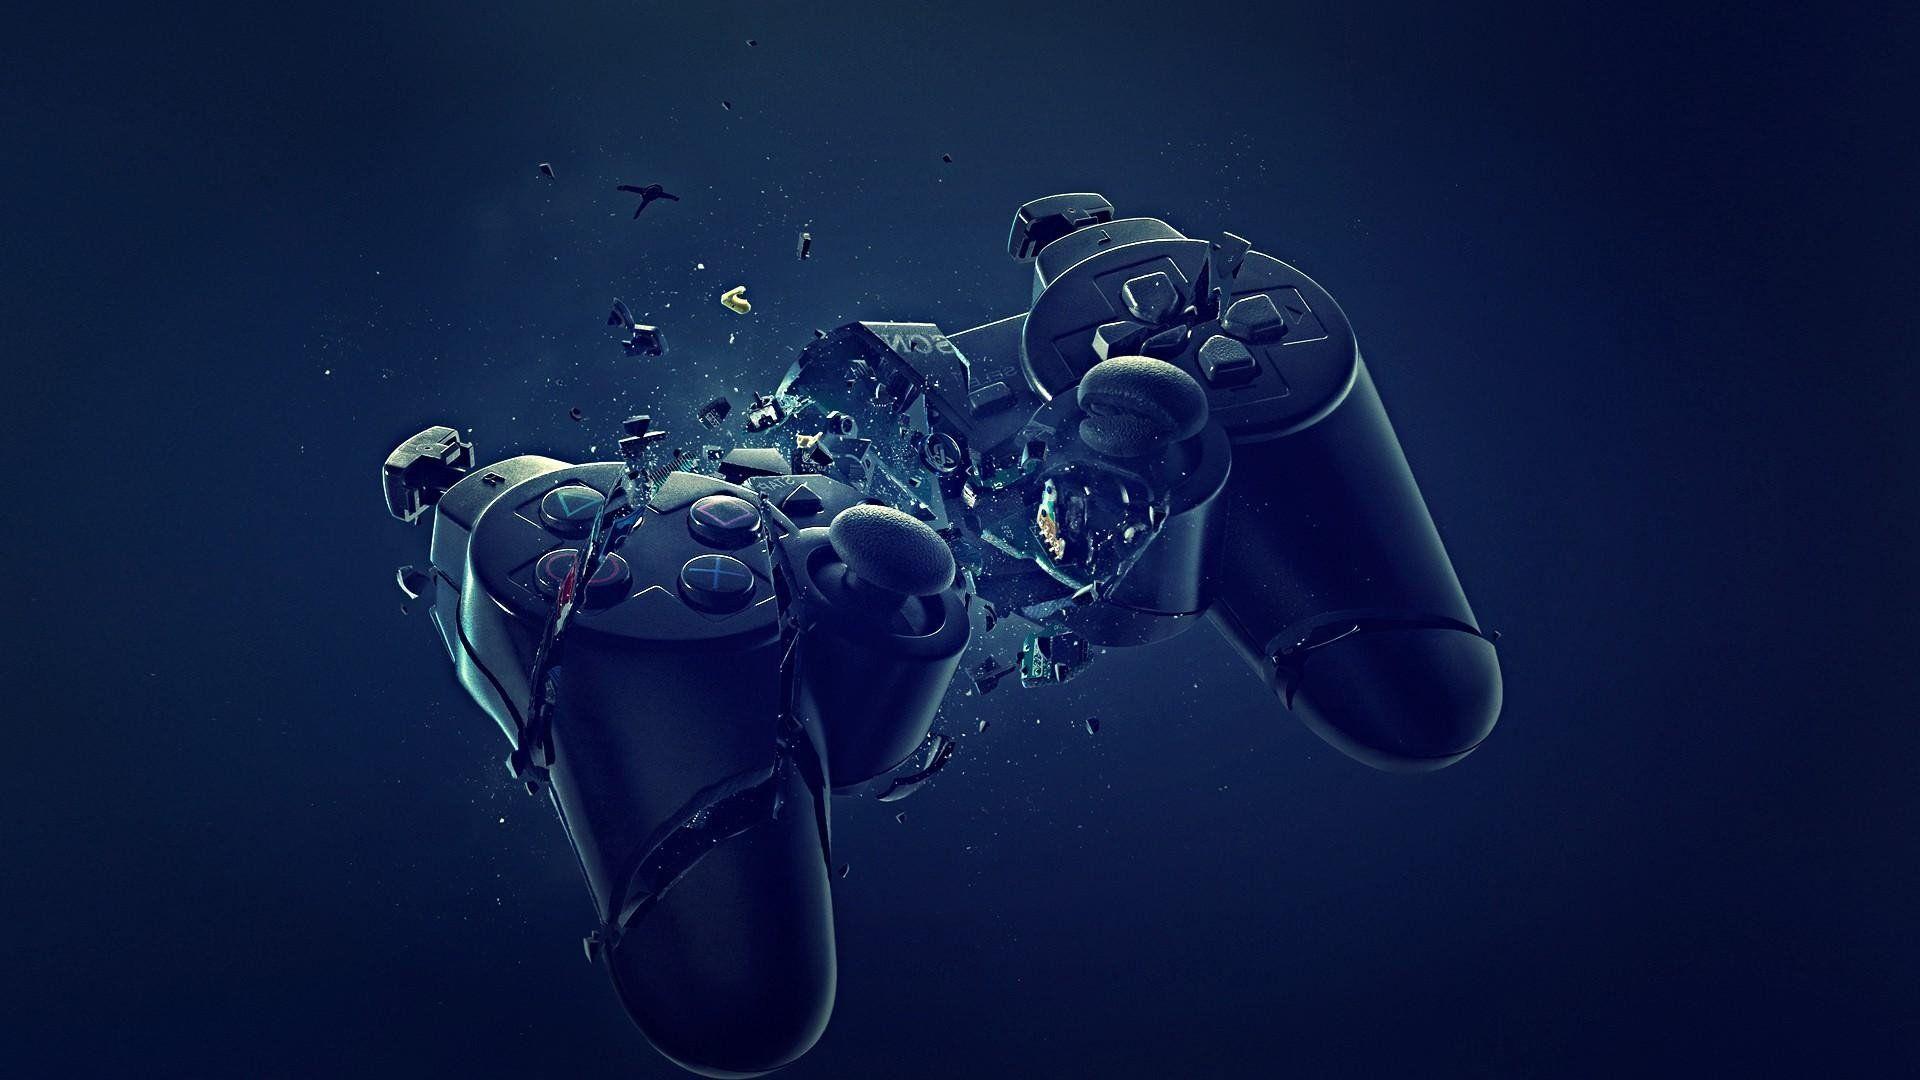 ps4 controle in 4k 3840x2160  4k gaming wallpaper, Gaming wallpapers,  Playstation